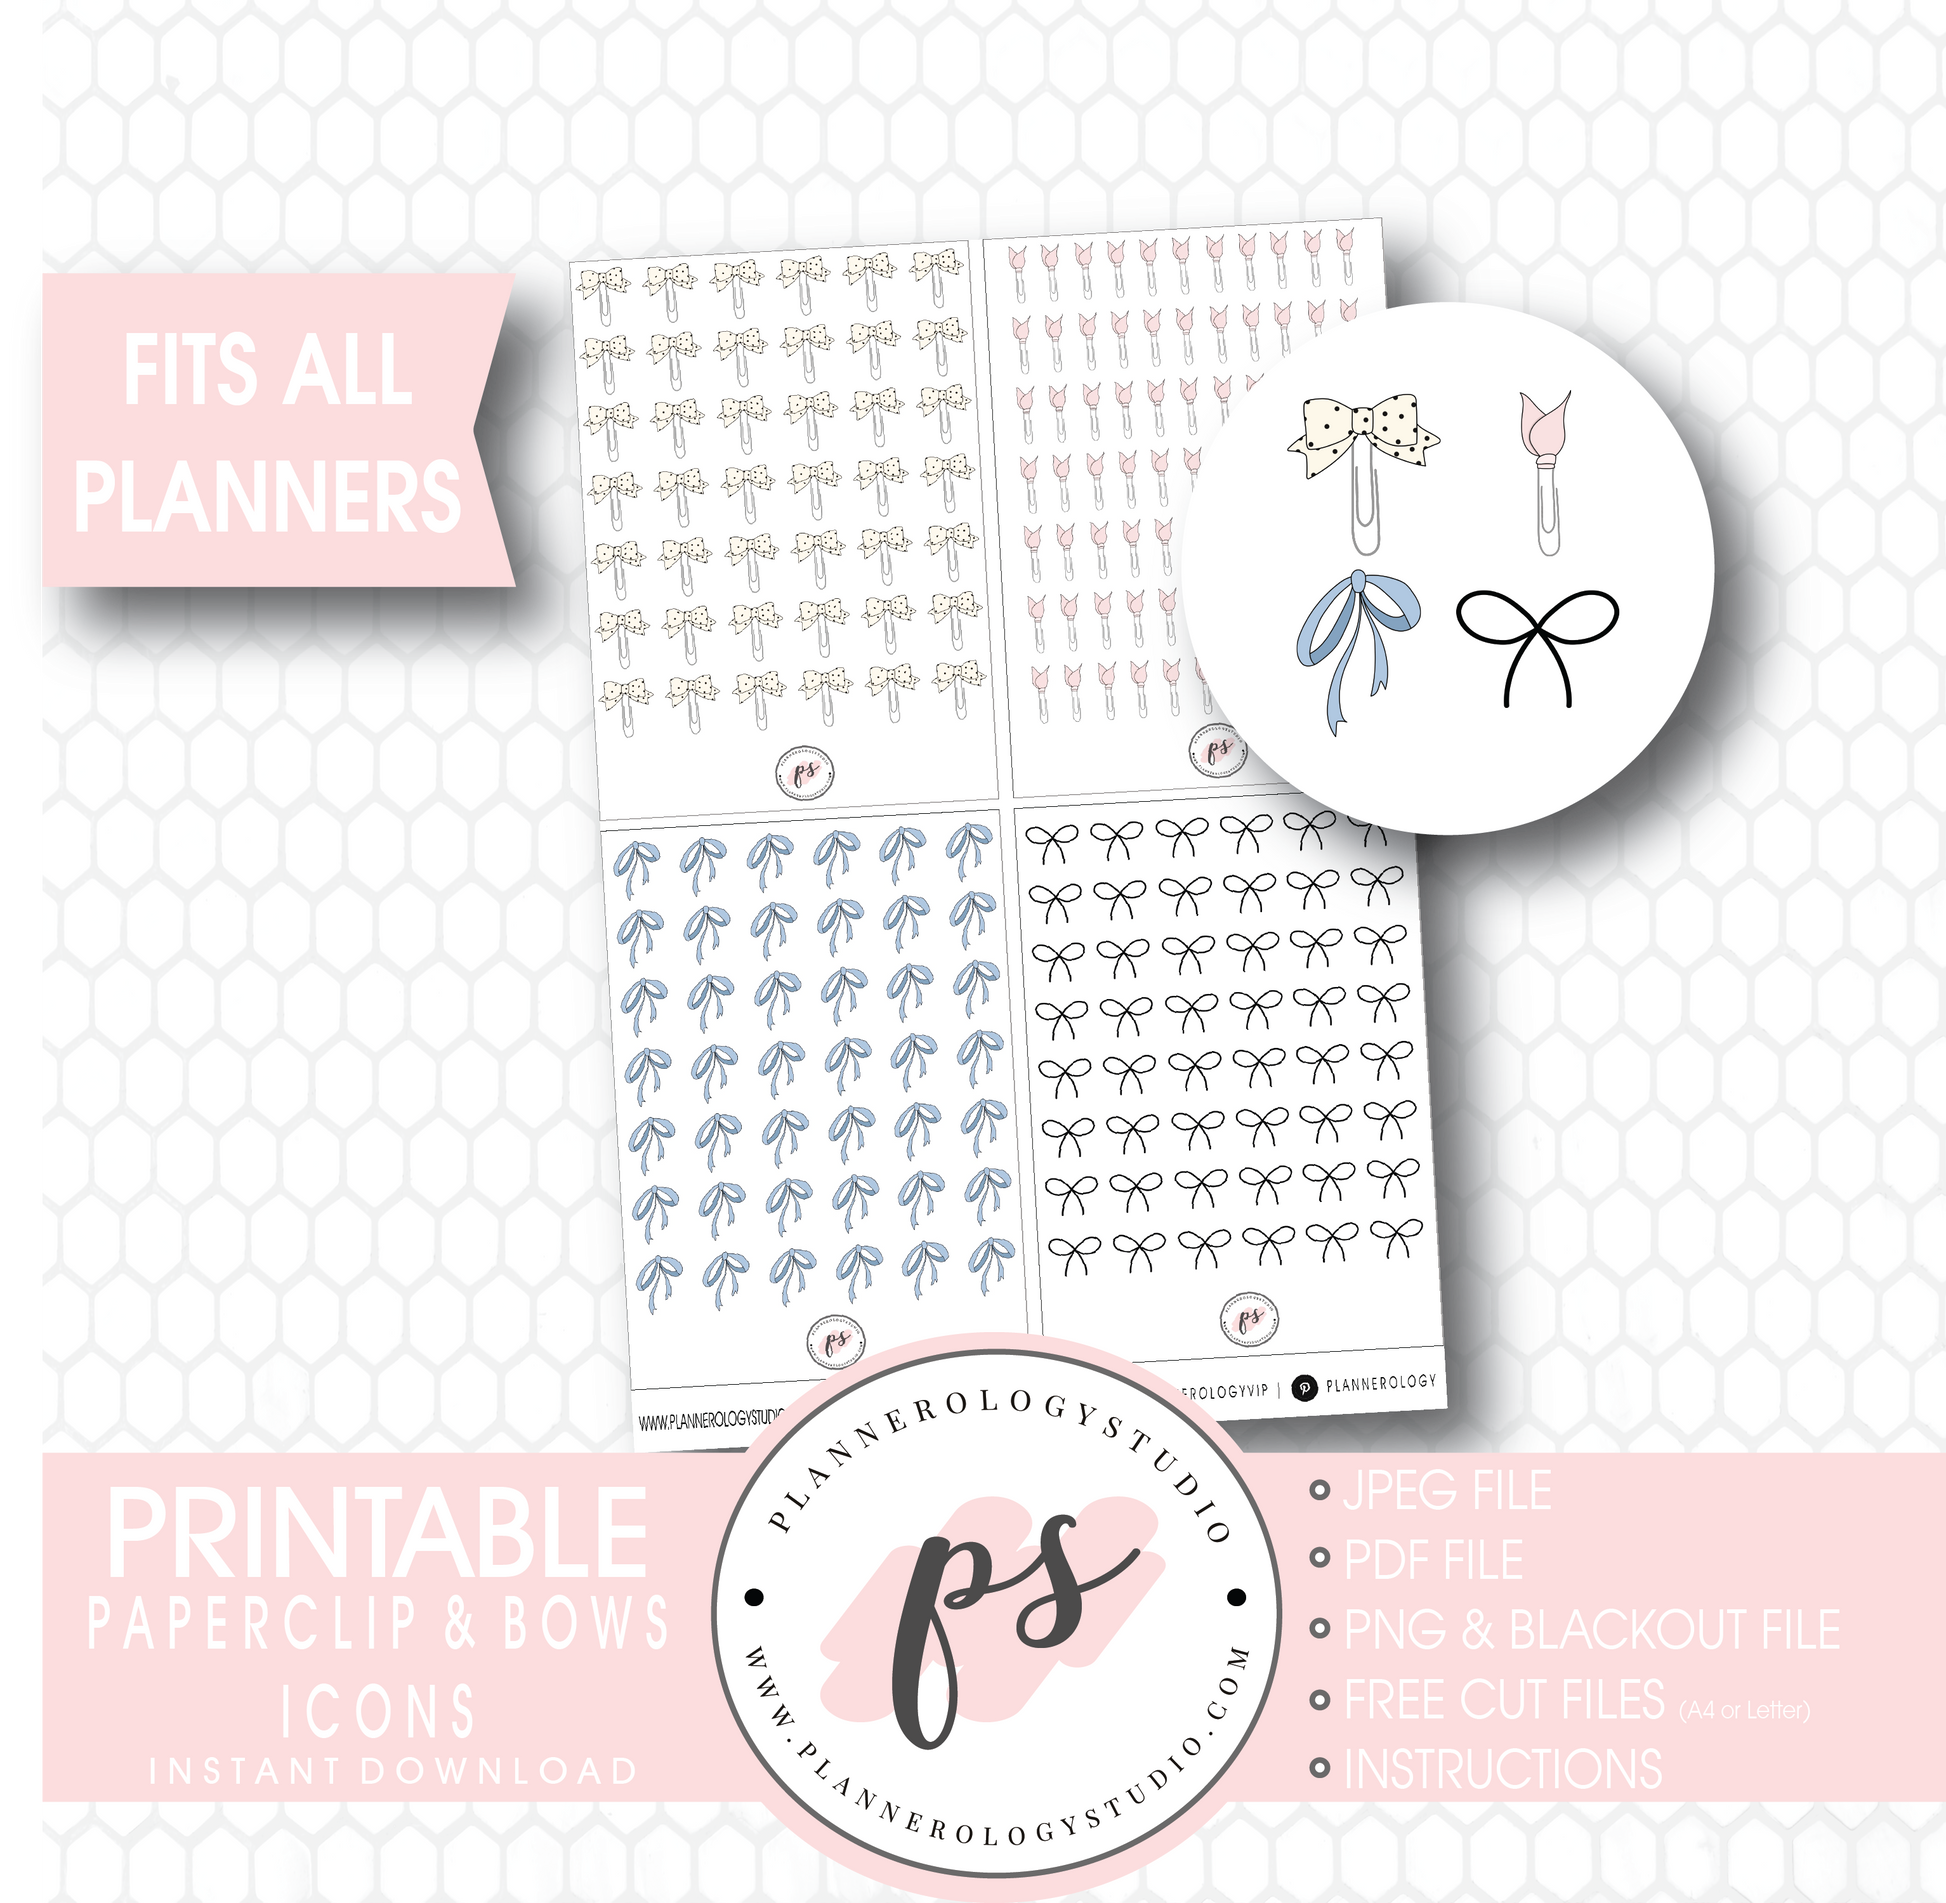 Paperclip & Bow Icons Digital Printable Planner Stickers - Plannerologystudio